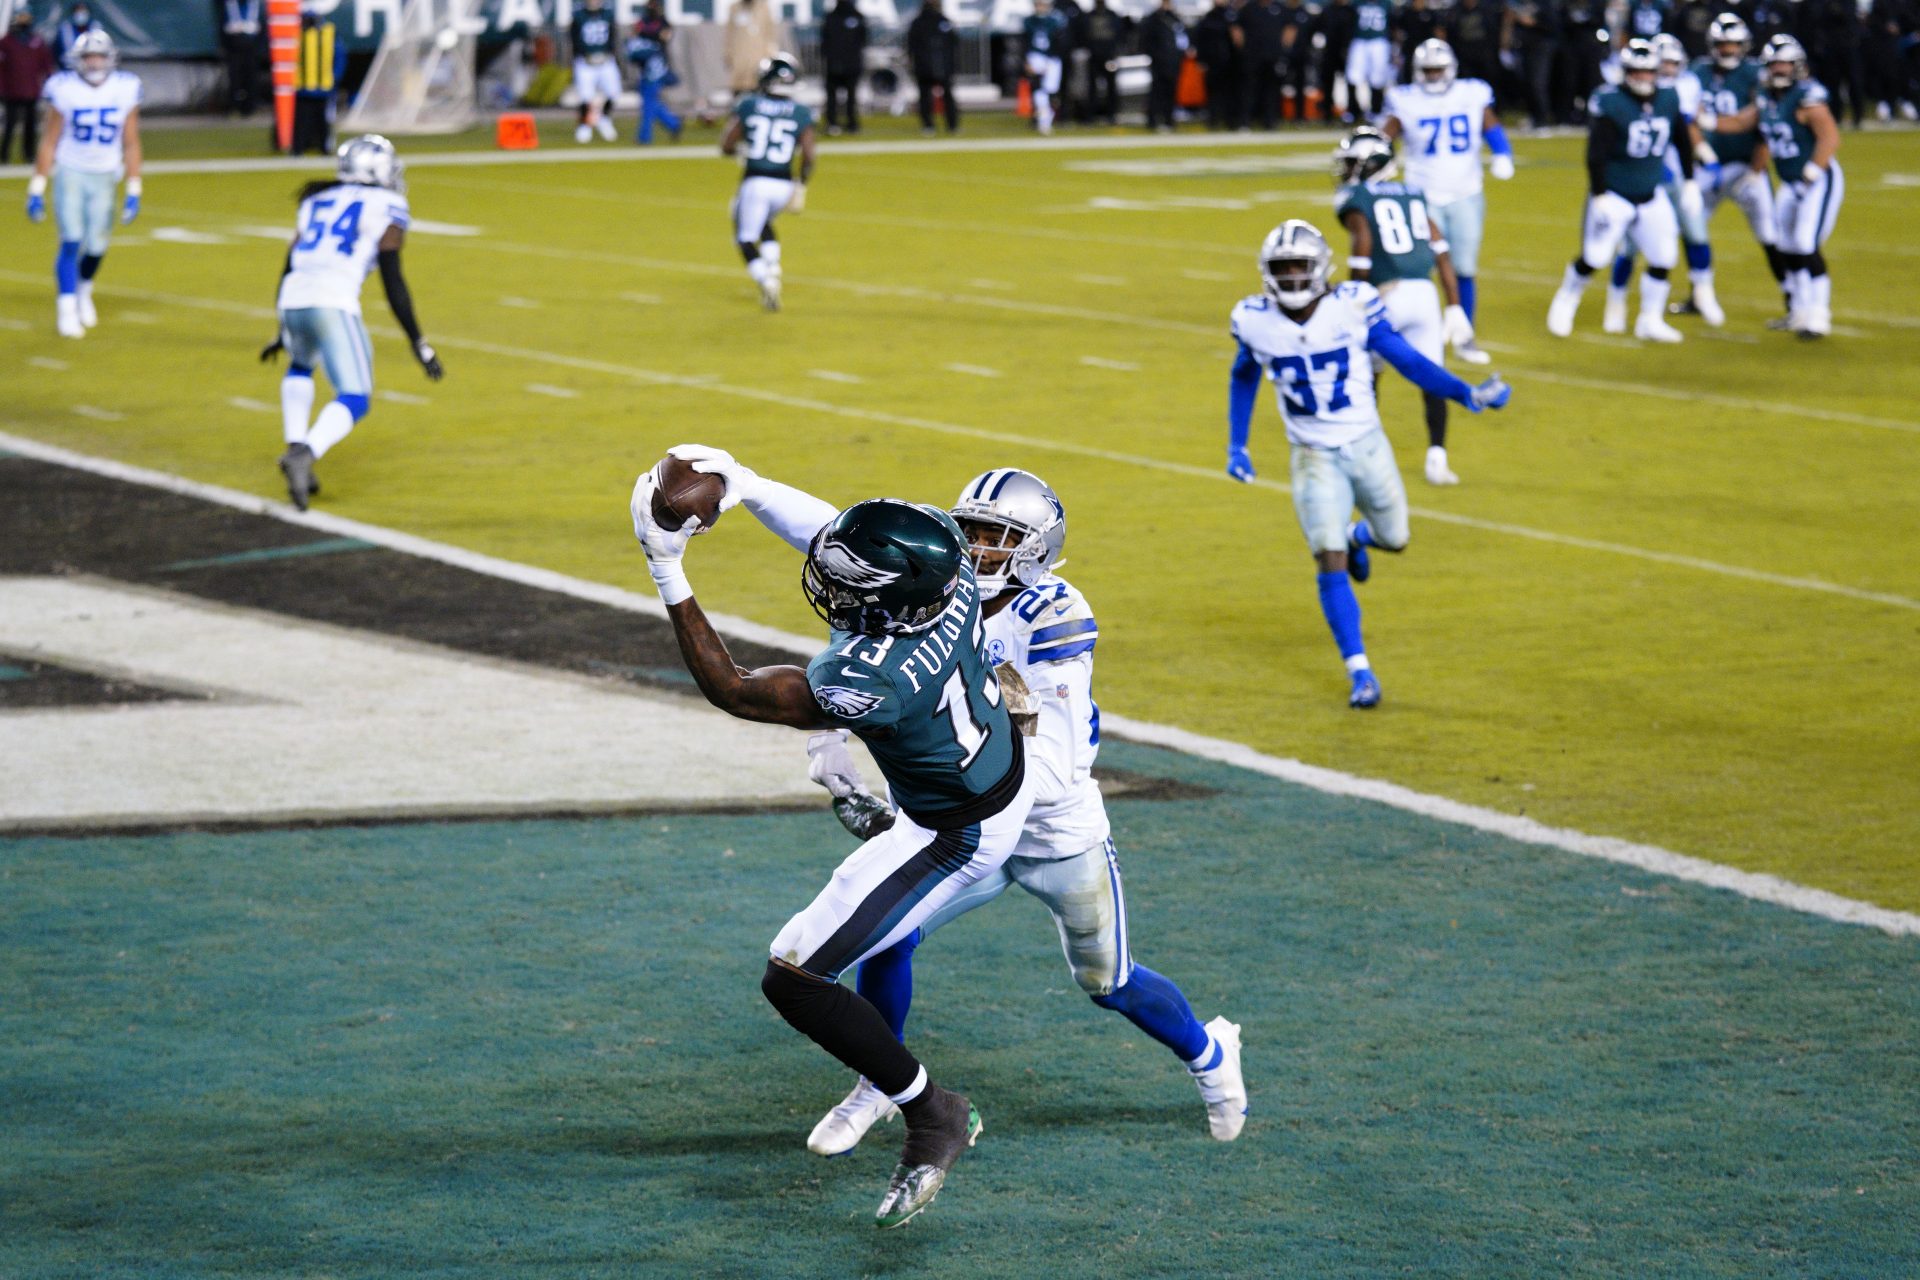 Philadelphia Eagles' Travis Fulgham (13) catches a touchdown pass against Dallas Cowboys' Trevon Diggs (27) during the second half of an NFL football game, Sunday, Nov. 1, 2020, in Philadelphia.